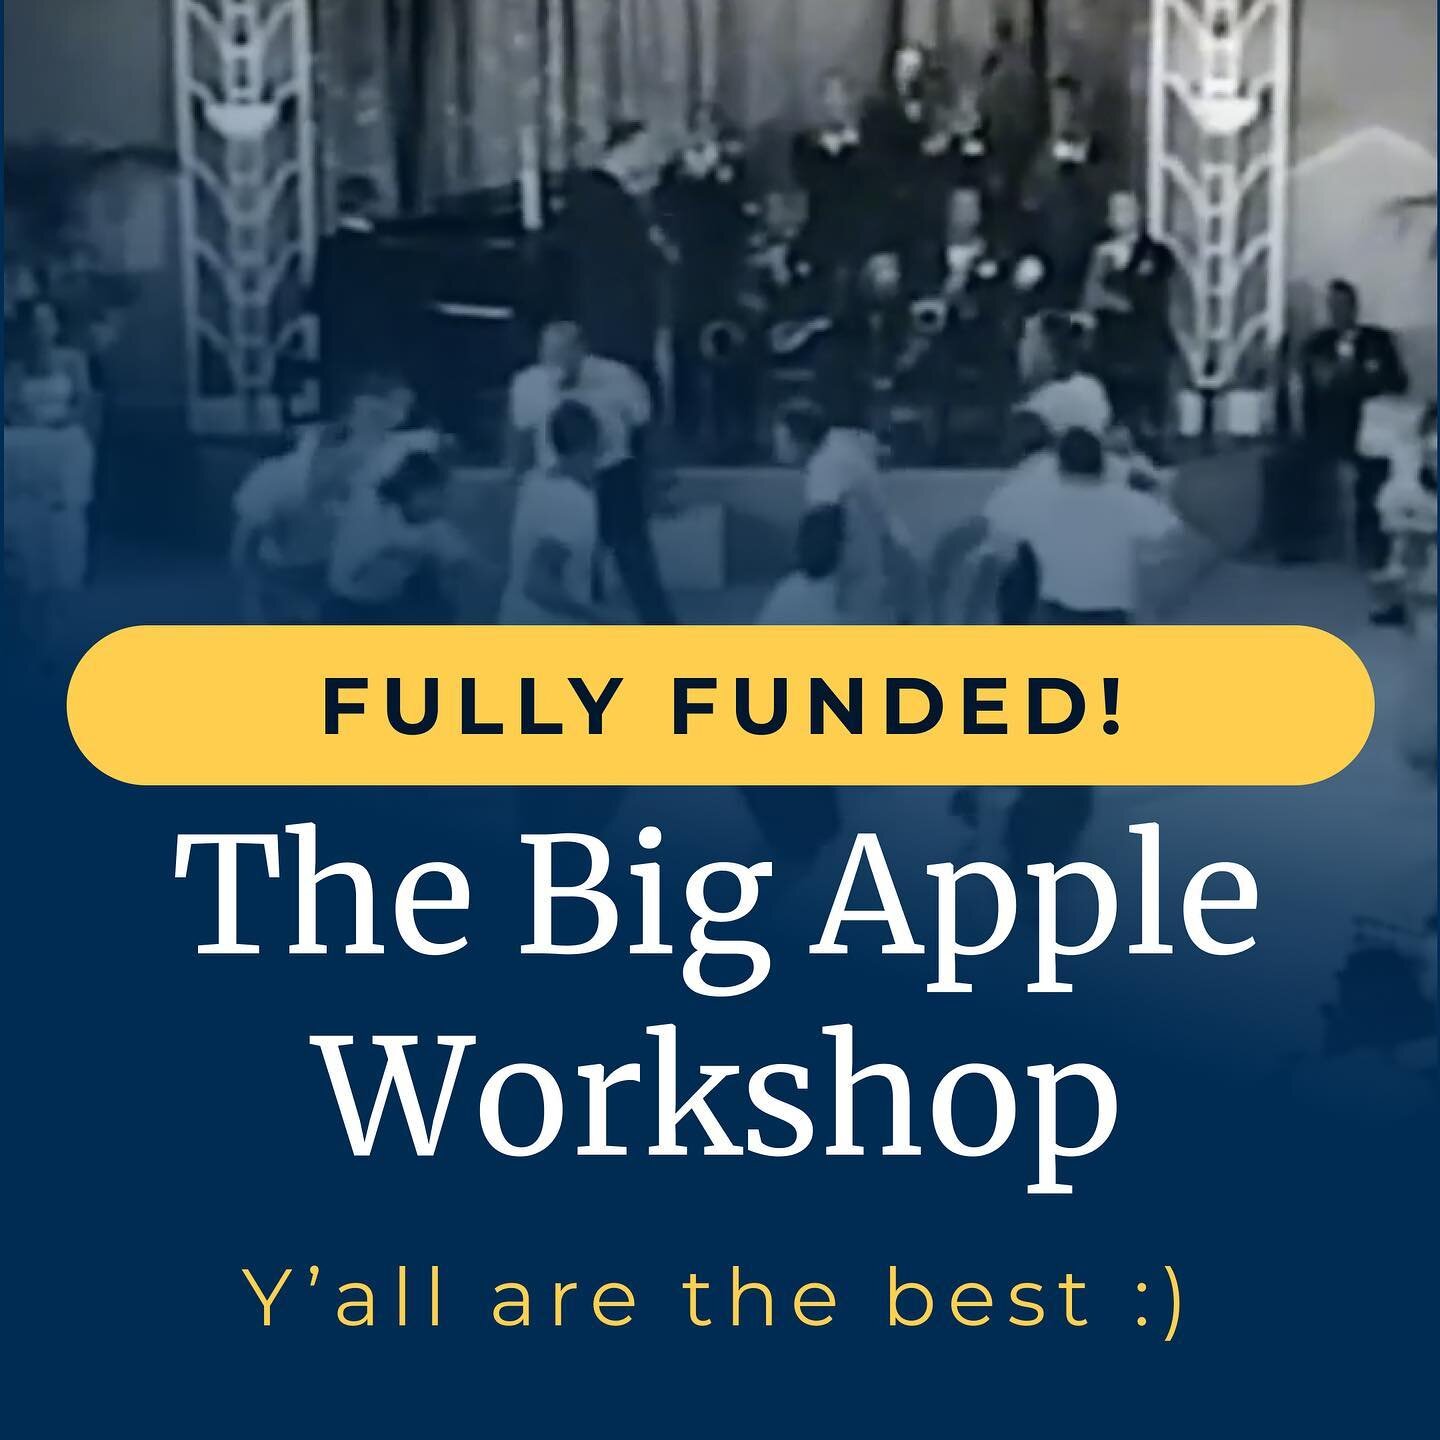 We&rsquo;re so excited to share the news: y&rsquo;all got us fully funded for our Big Apple Workshop! Thank you so much for everyone that preordered and made this possible. We can&rsquo;t wait to see you all on the 20th!